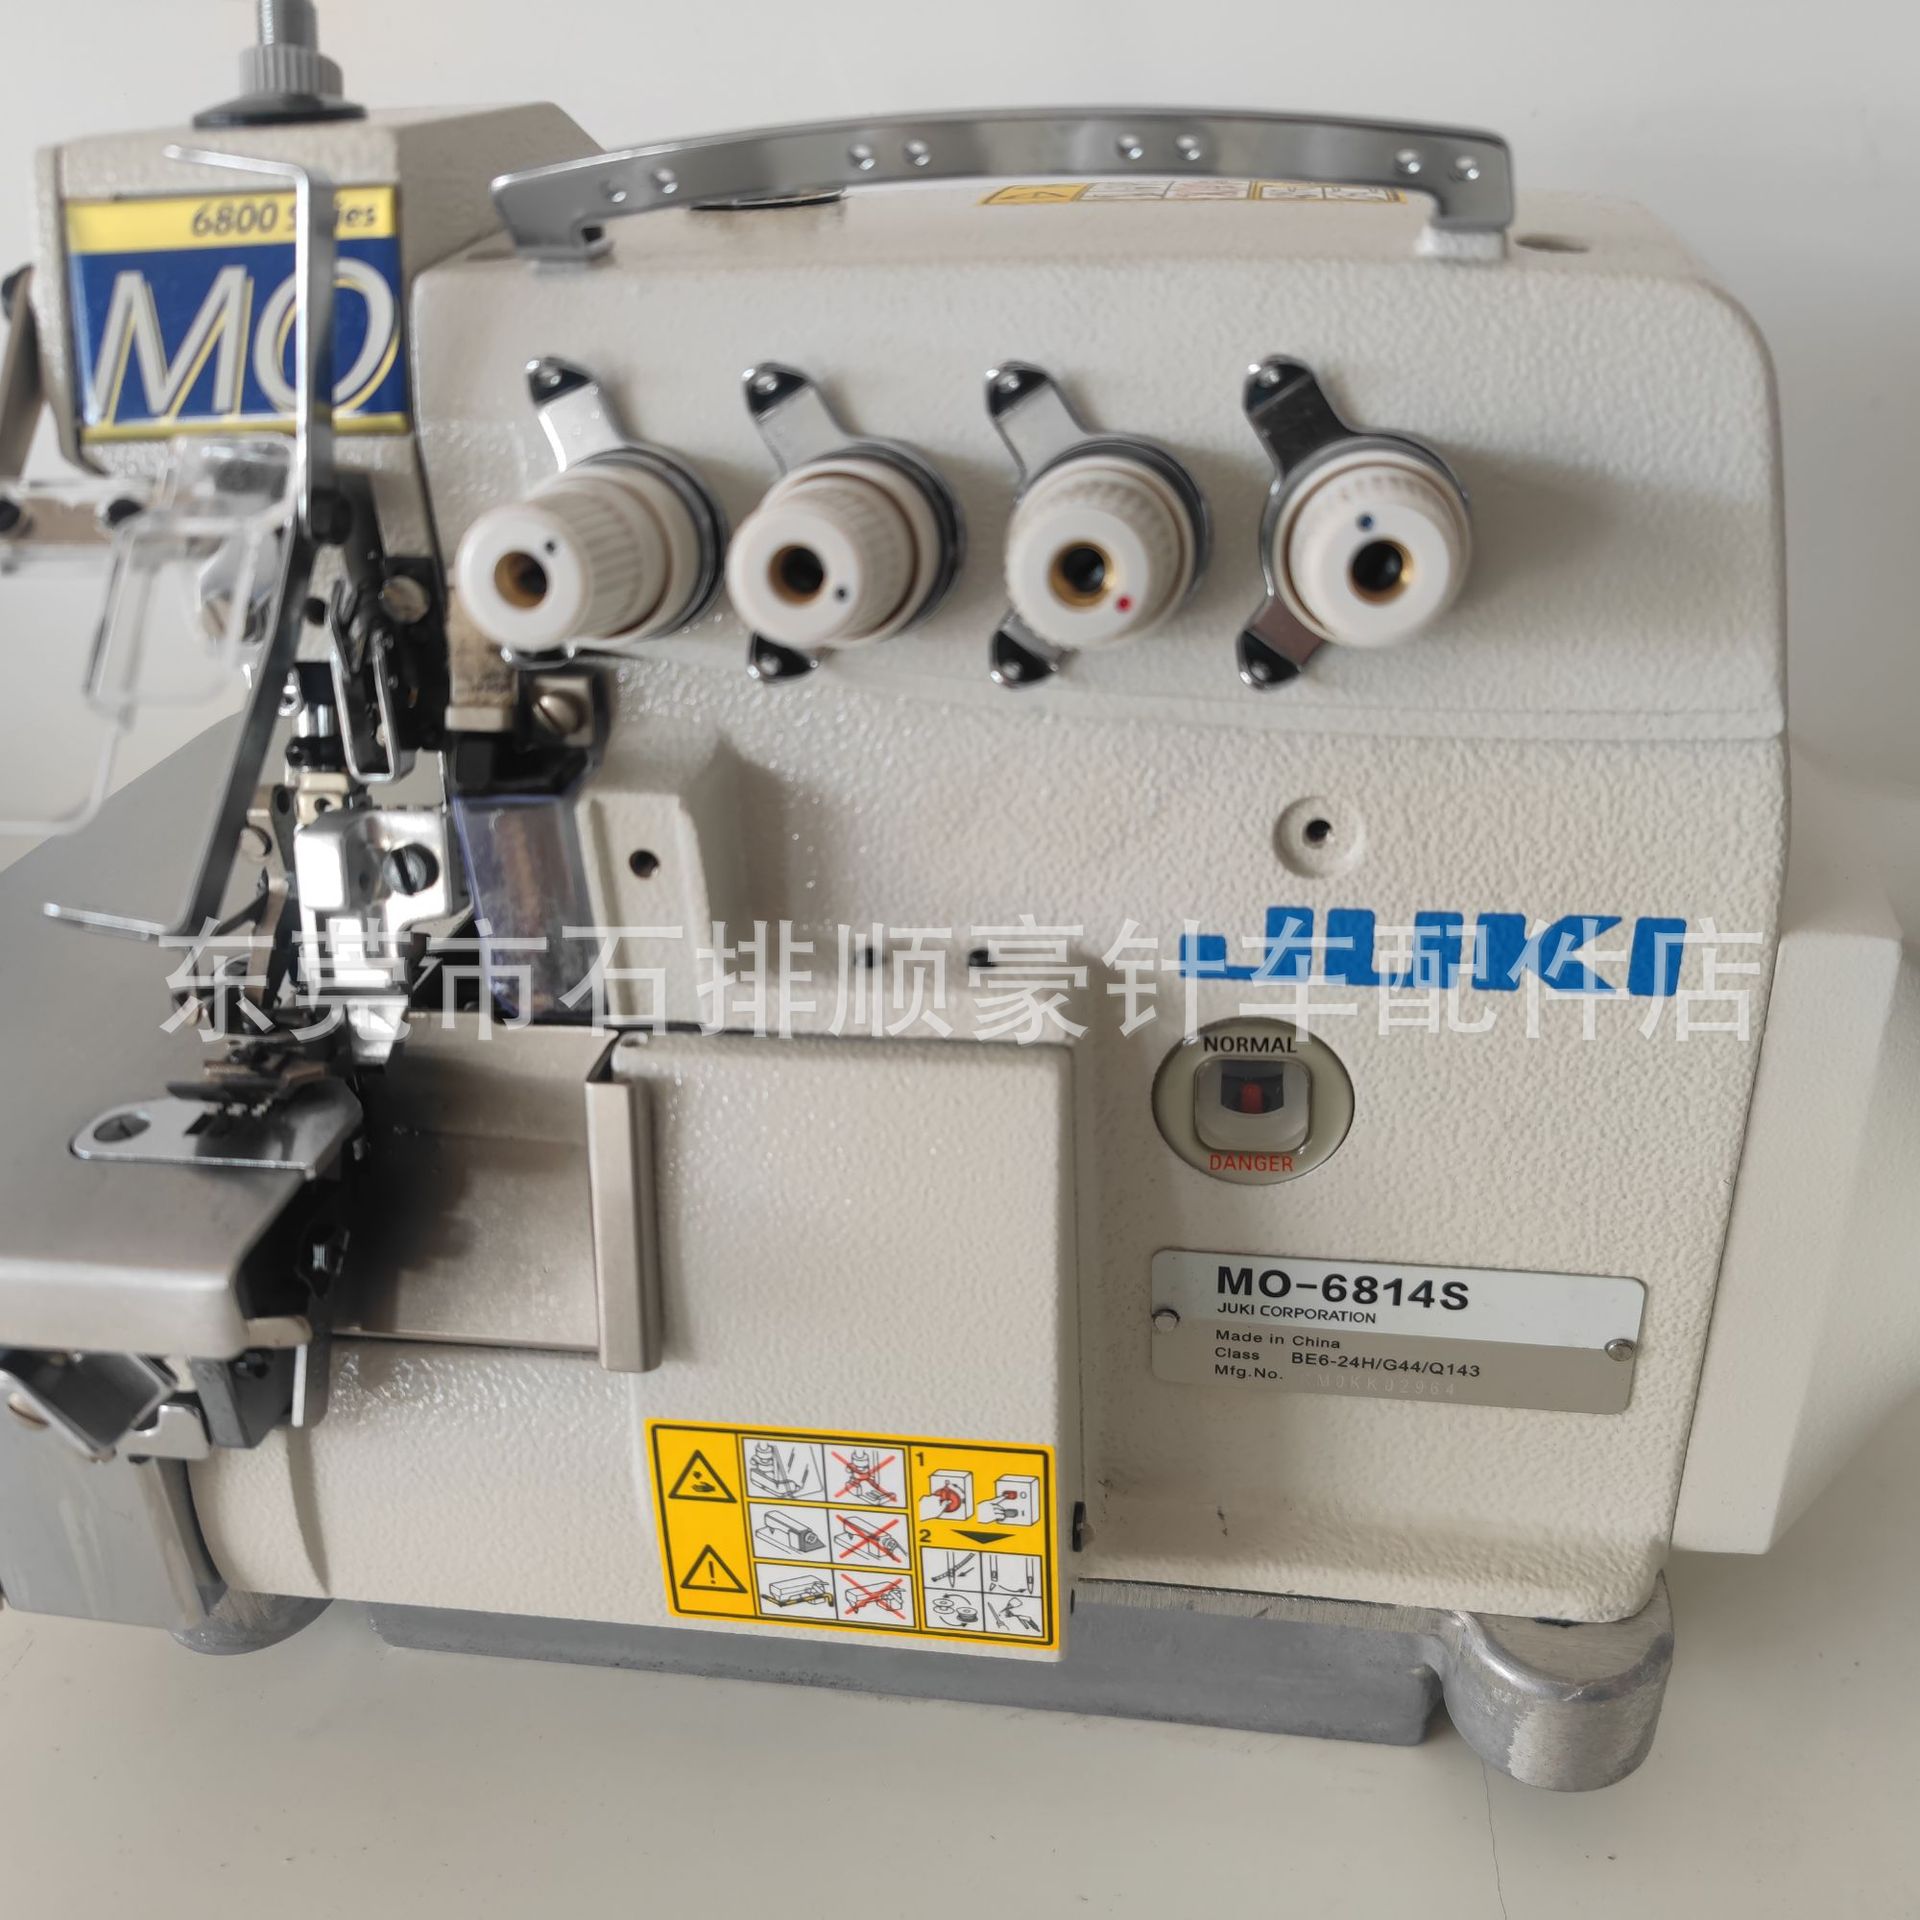 New Juki Heavy Machine Mo6814s Direct Drive 4-Line Overedger Electric Piping Sewing Equipment Edging Sewing Machine